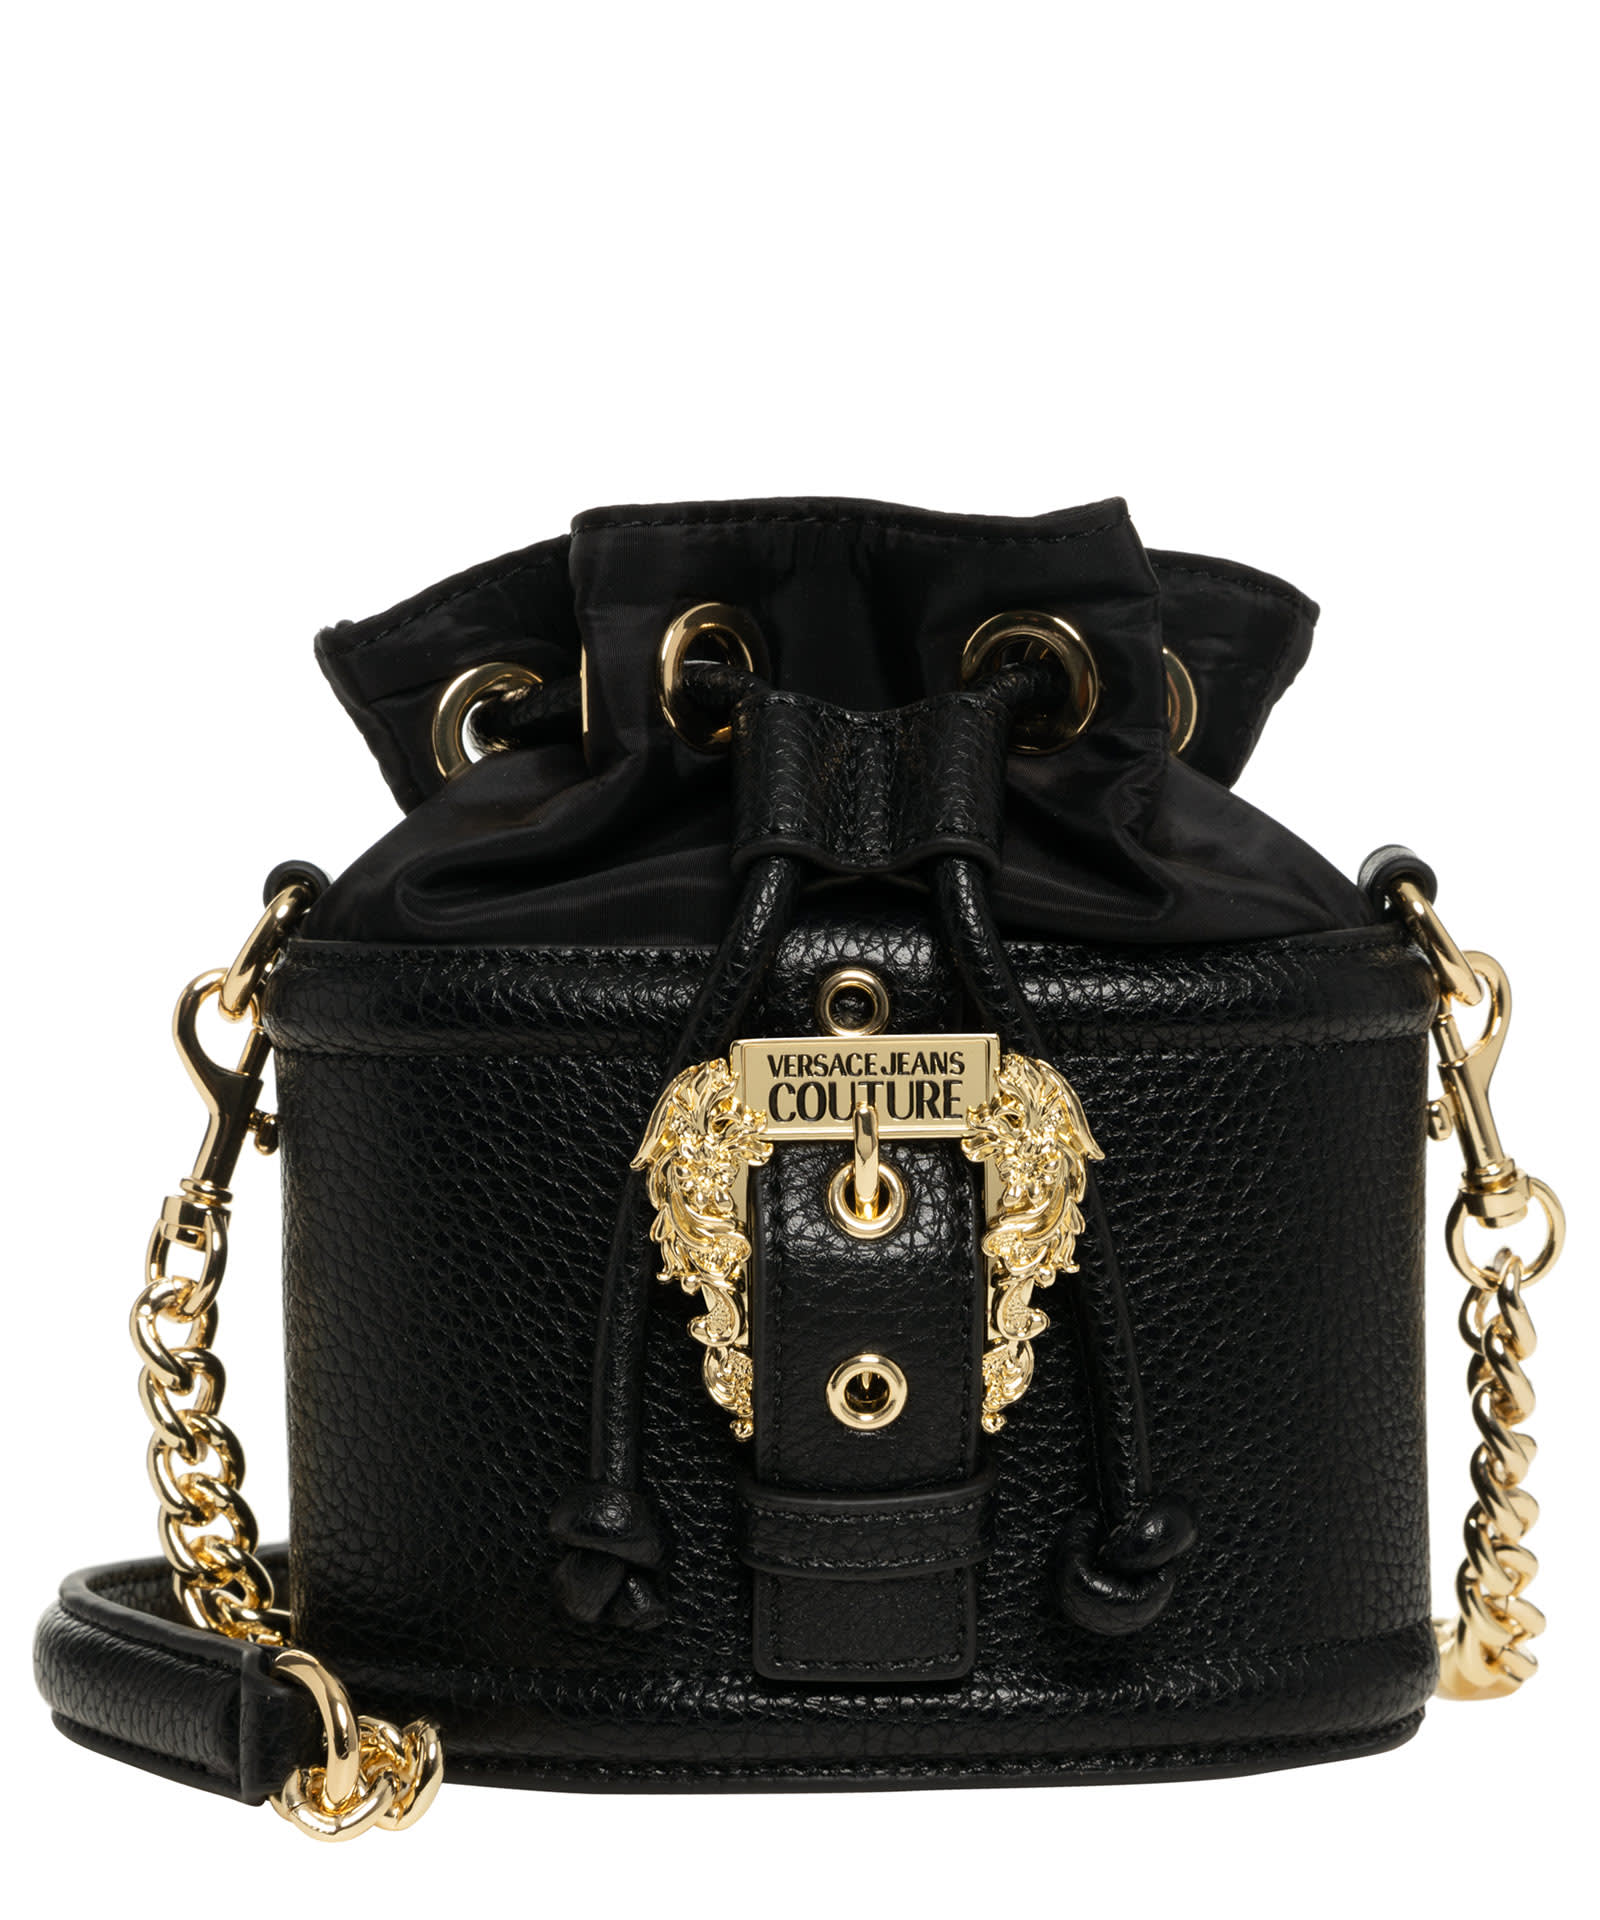 VERSACE JEANS COUTURE BUCKET BAG